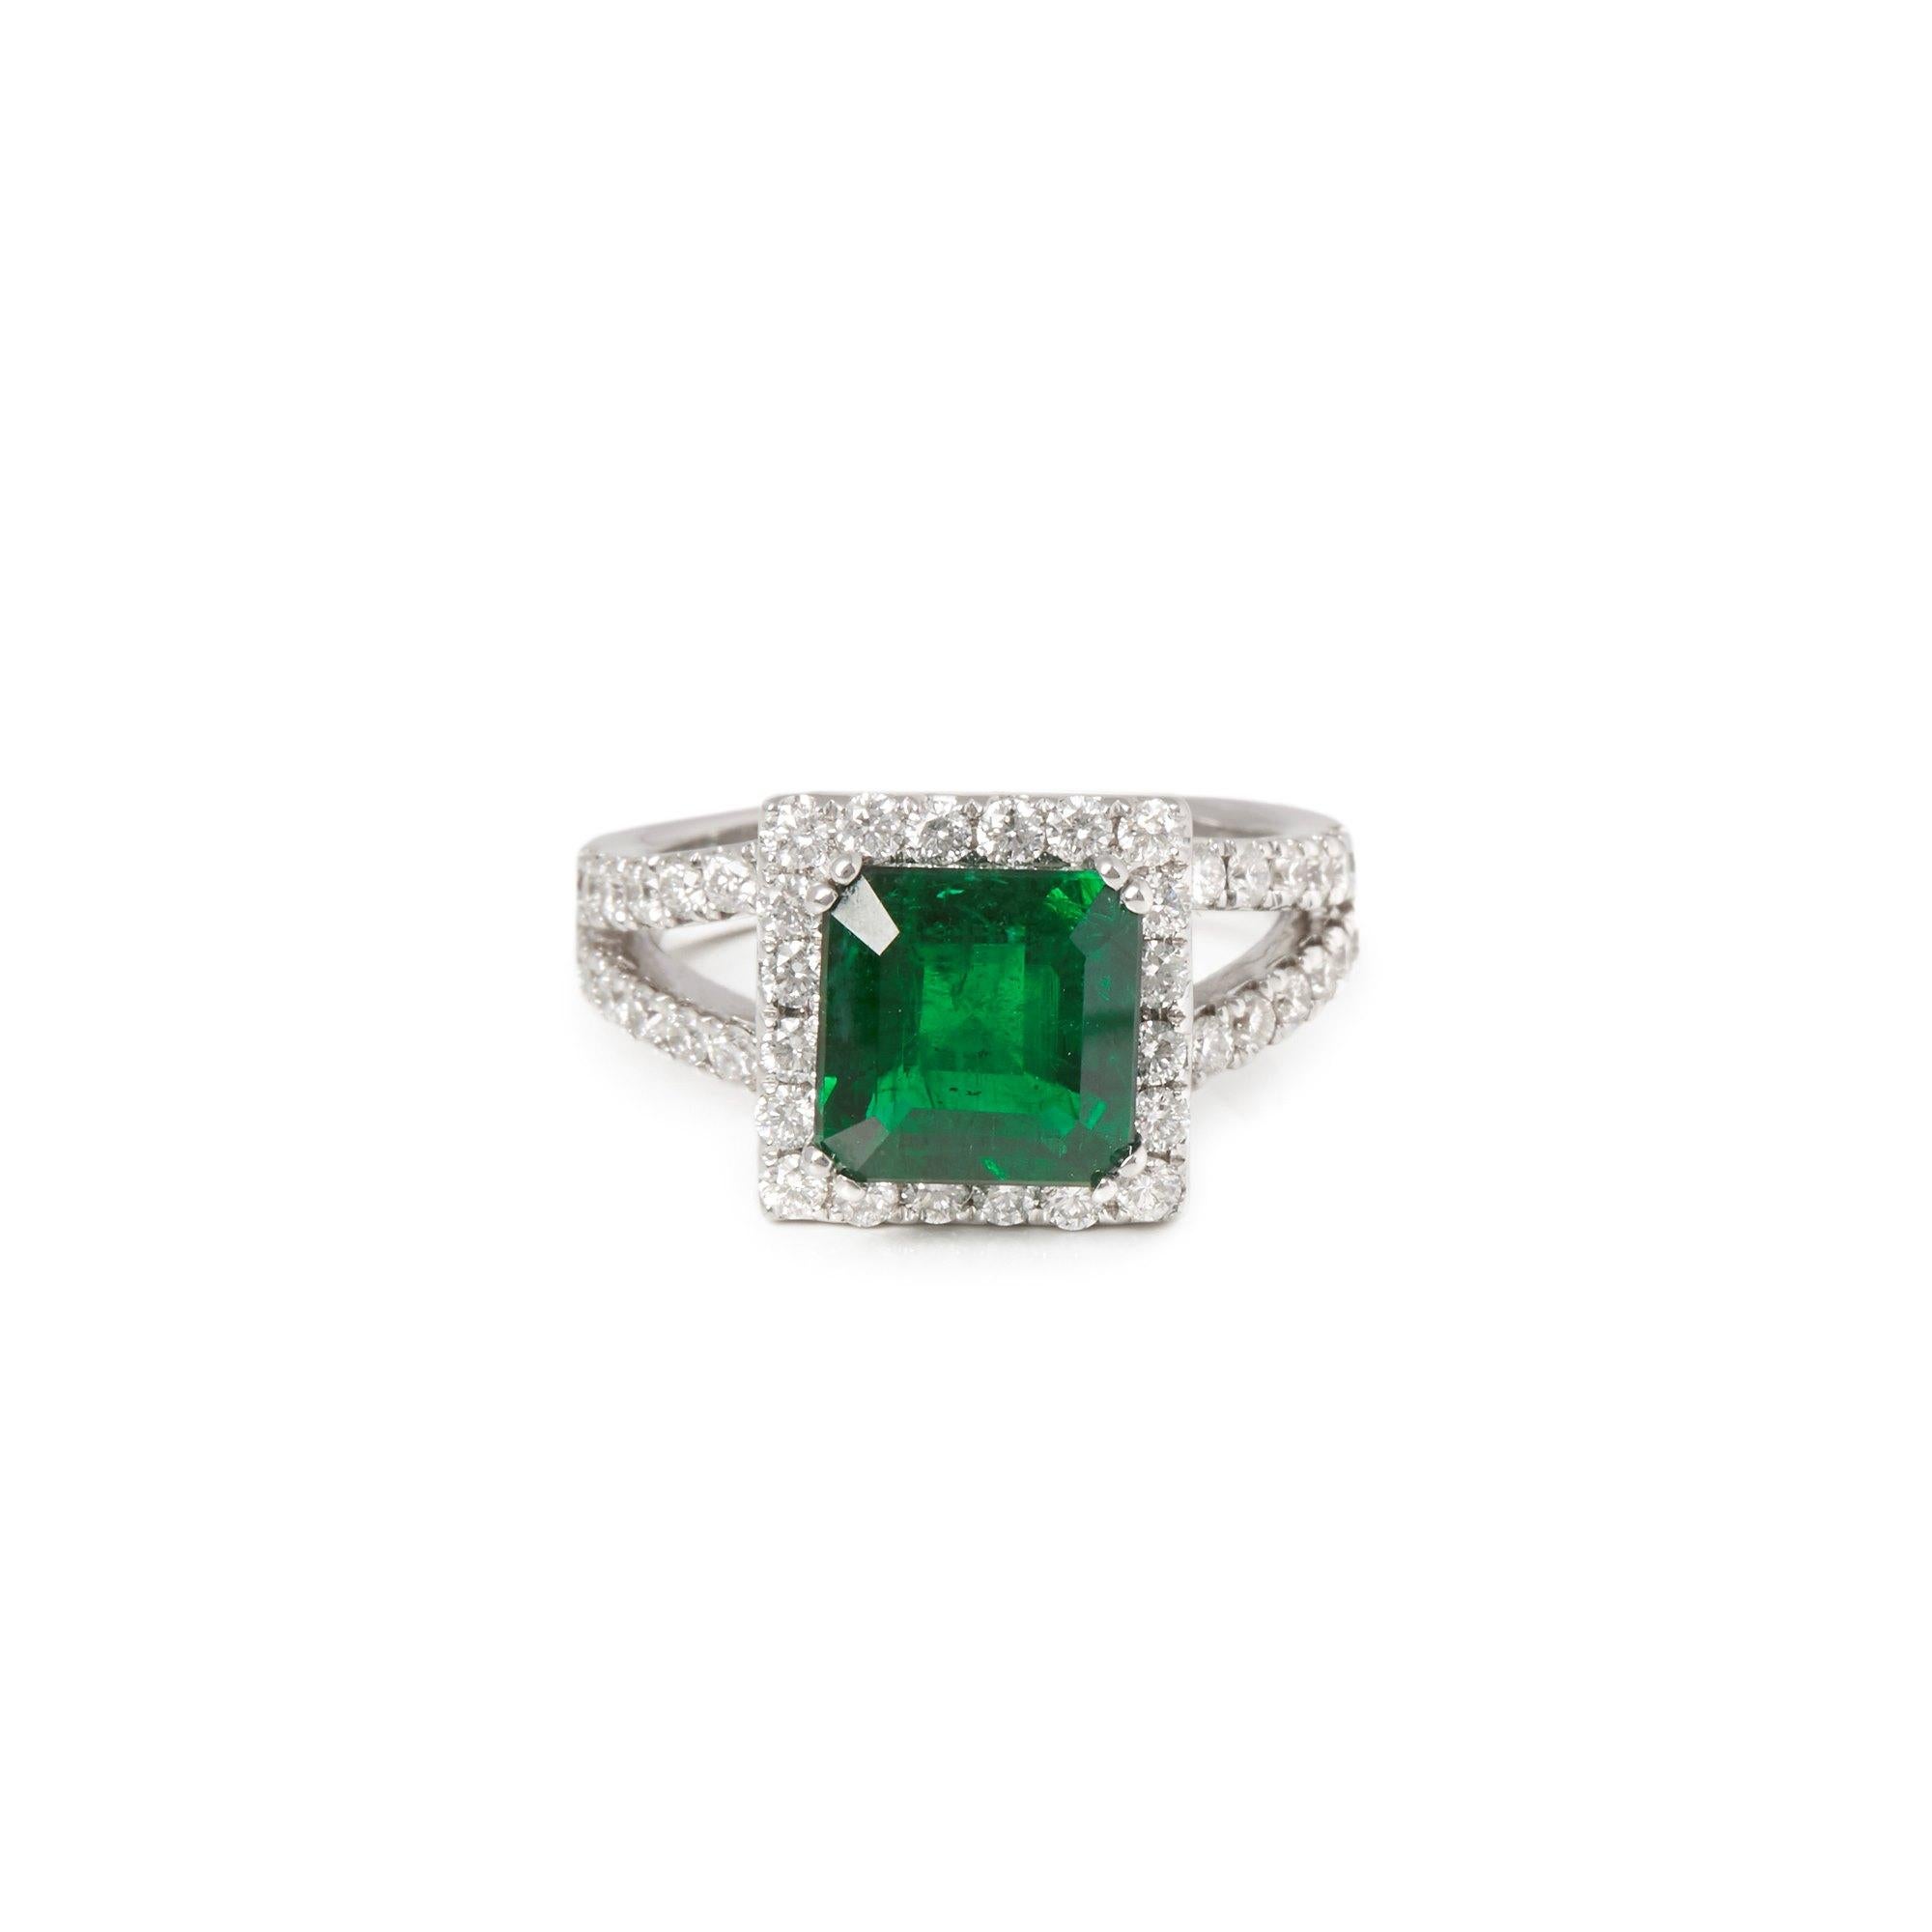 This ring designed by David Jerome is from his private collection and features one square cut Emerald totalling 4.60cts. Set with round brilliant cut Diamonds totalling 1.28cts mounted in an 18k white gold setting. Finger size UK M, EU size 52, USA